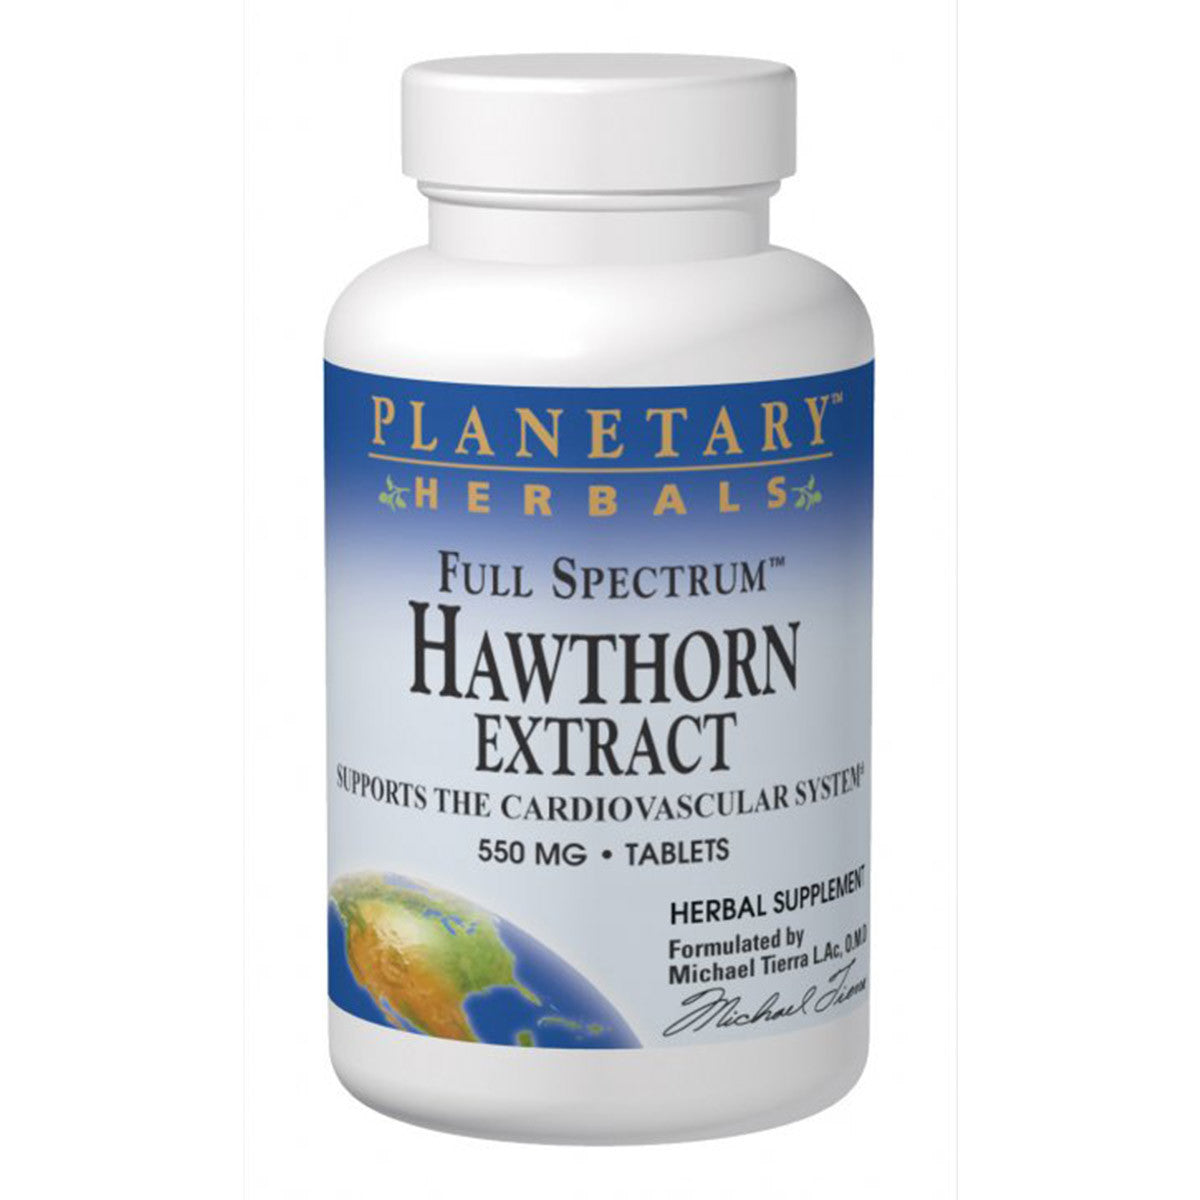 Primary image of Full Spectrum Hawthorn Extract 550mg